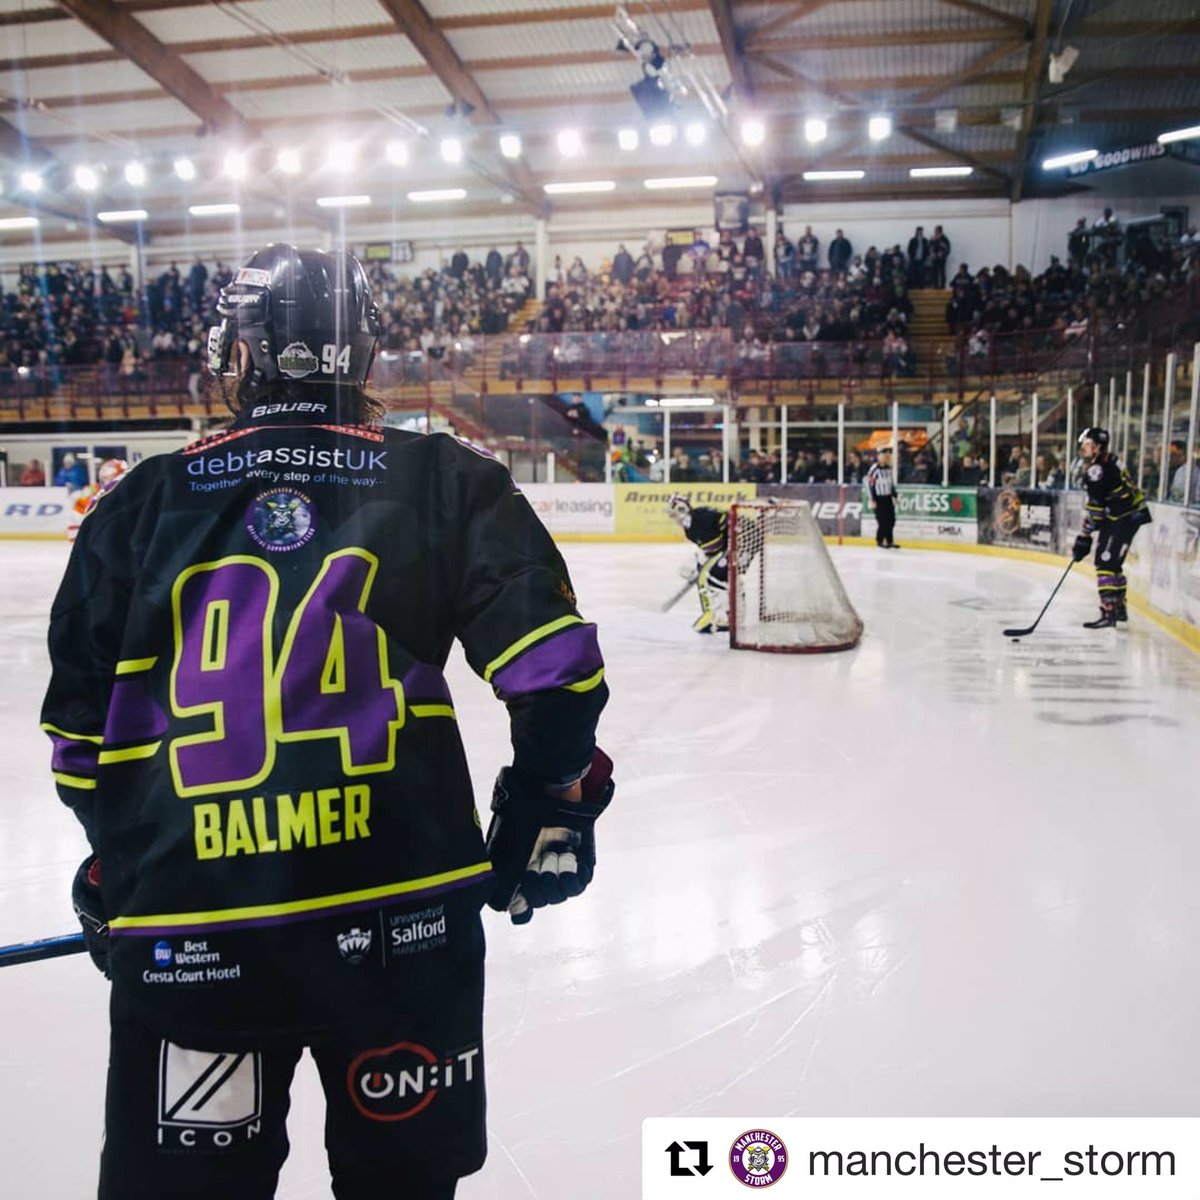 Icon, proudly on display on the @Mcr_Storm 18/19 @DunamisWear short covers! 
.
.
👌🏻⚡️👨🏼‍💻 #icon #weareicon #digitaldesign #socialmediaartwork #partnership #manchesterstorm #letsgostorm #shortcovers #dunamissportswear #kitpresence